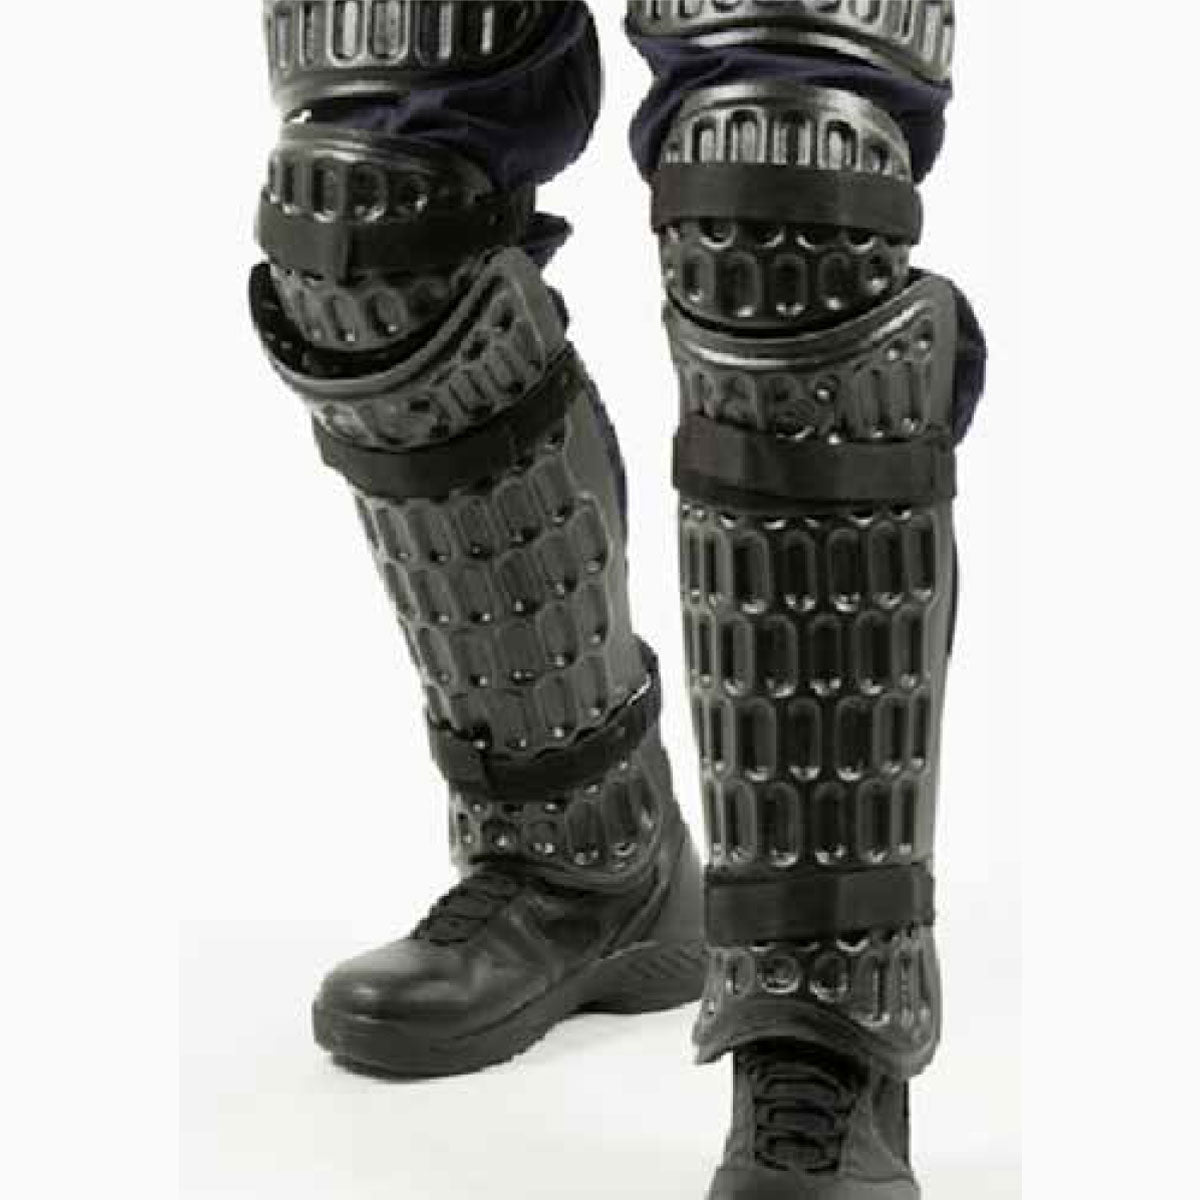 Scorpion PPE Knee & Shin Protector Riot Gear Scorpion Riot Equipment Extra Small Tactical Gear Supplier Tactical Distributors Australia